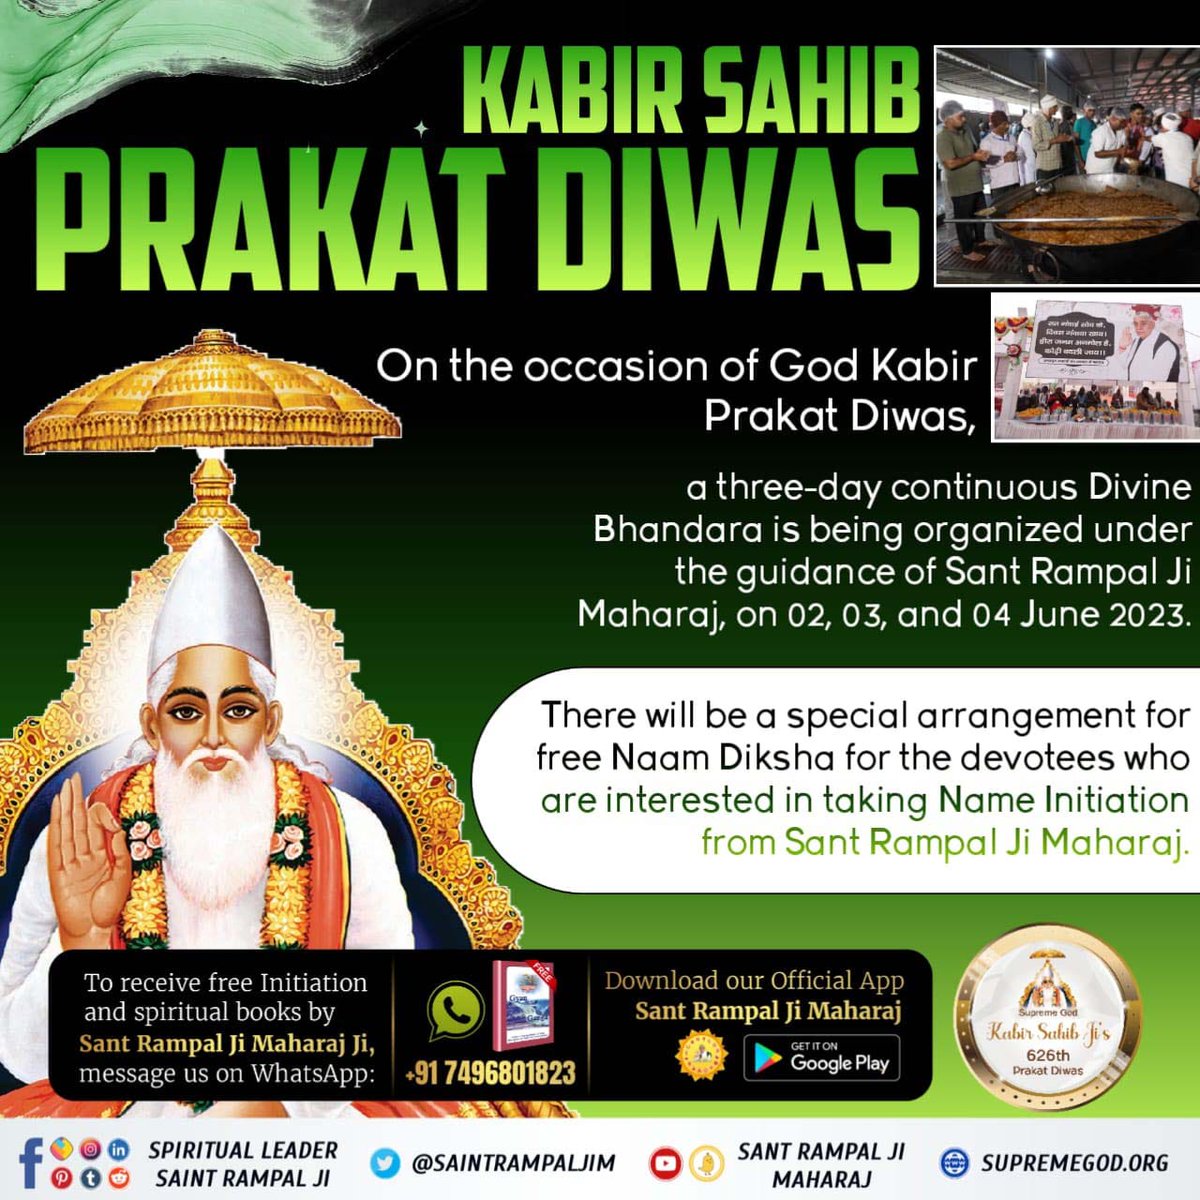 #Biggest_Bhandara_Of_TheWorld
SantRampalJiMaharaj has created such a society. Where there is no discrimination of caste.
 If you also want to see such a society, then definitely come to the three-day huge Bhandara organized on the occasion of Kabir Prakat Diwas (2, 3, 4 June)🙏🙏